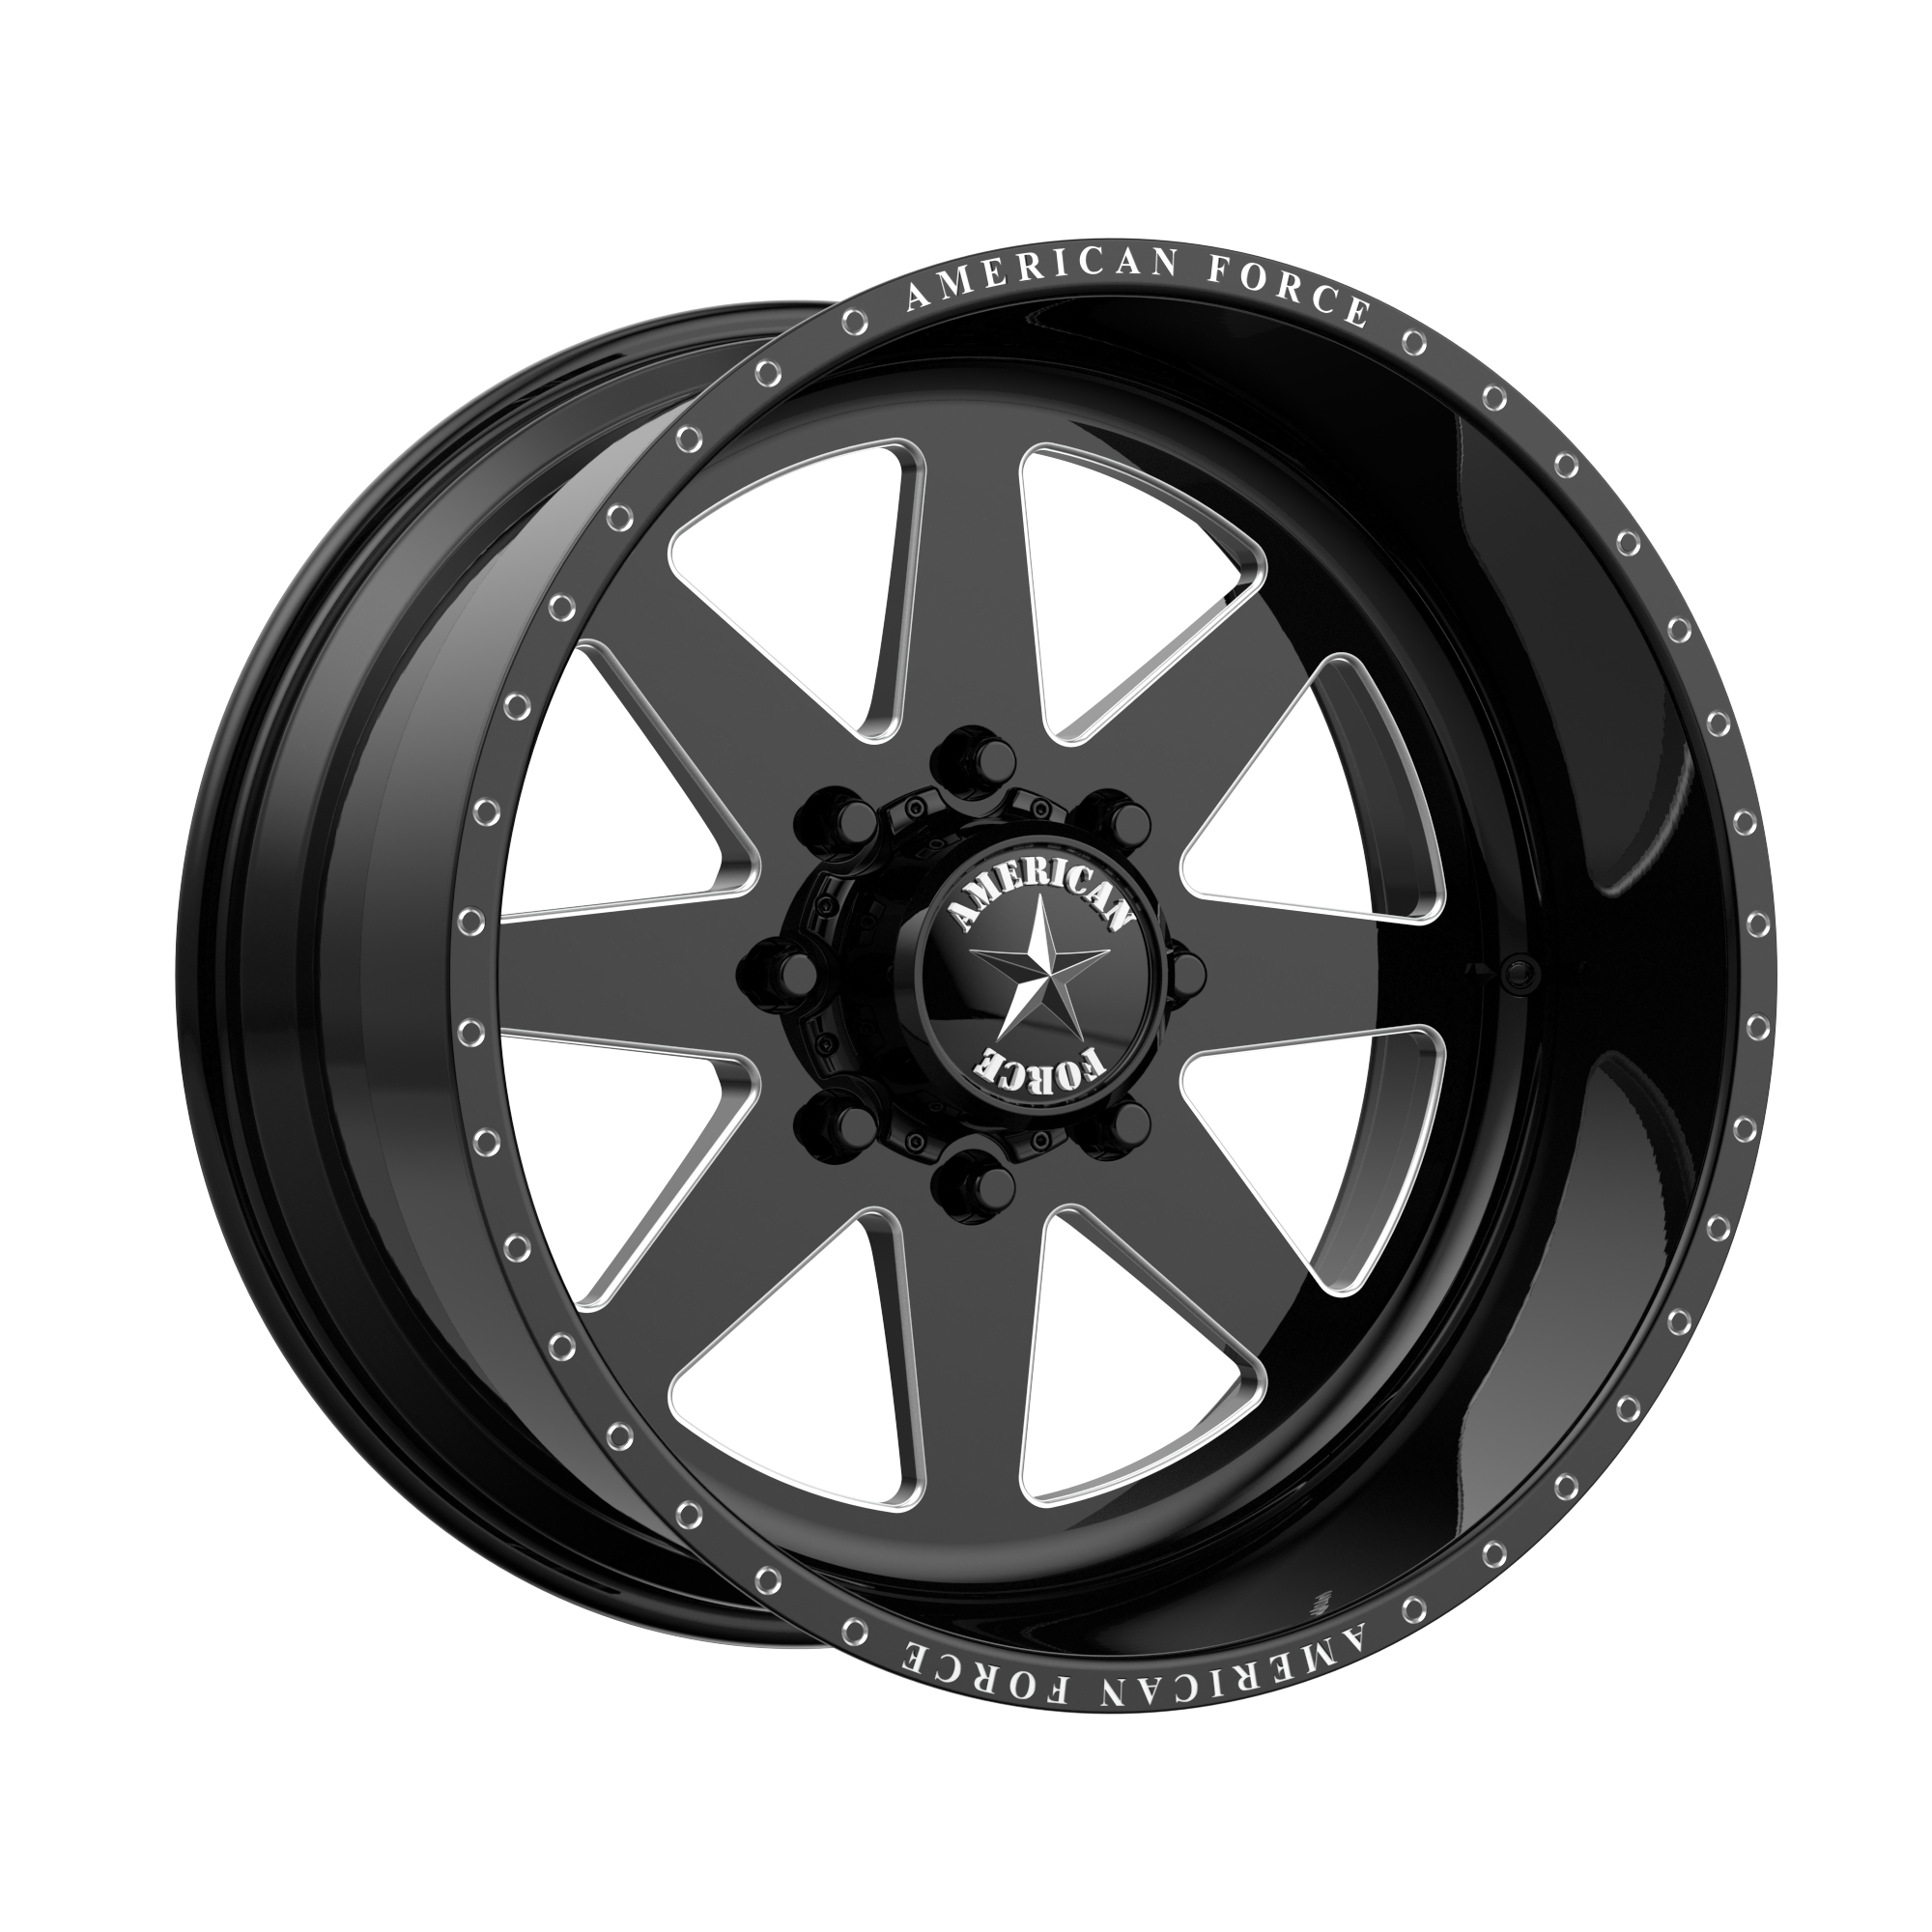 INDEPENDENCE SS 26x14 6x139.70 GLOSS BLACK MACHINED (-73 mm) - Tires and Engine Performance